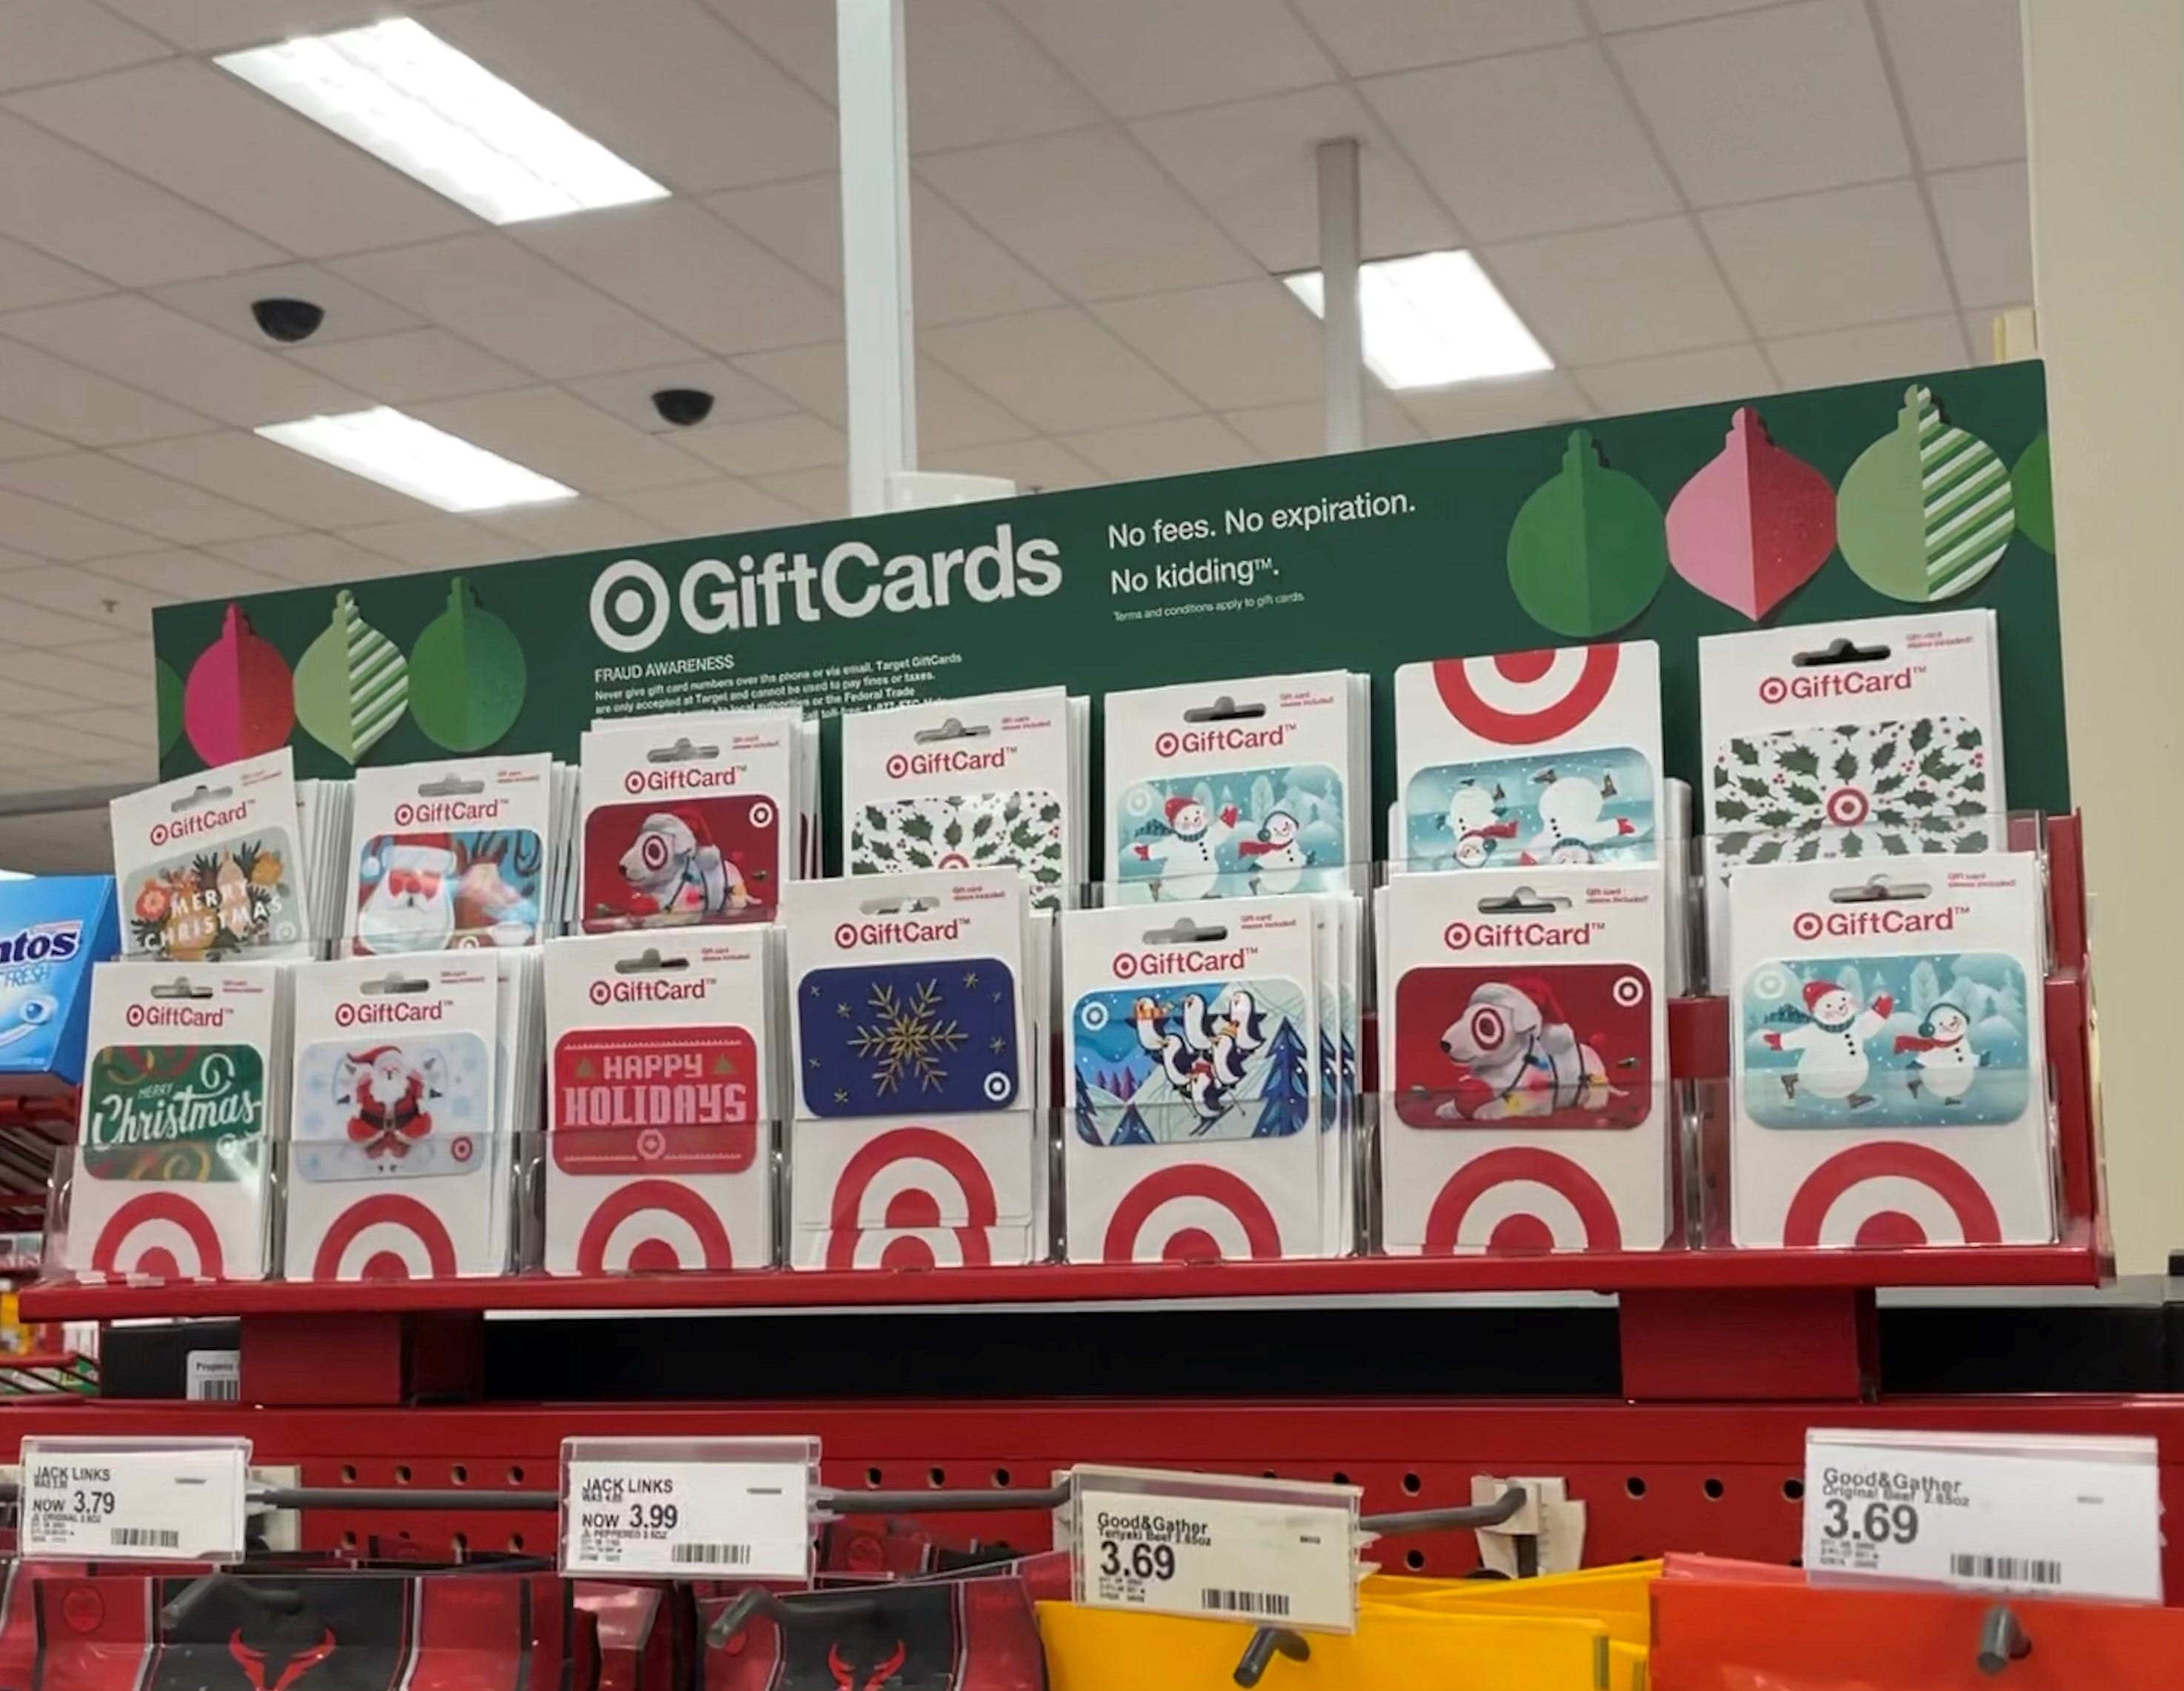 Target Gift Card Discount 2020 Save 10 Percent On Gift Cards Dec 5 6 - roblox 10 gift card target